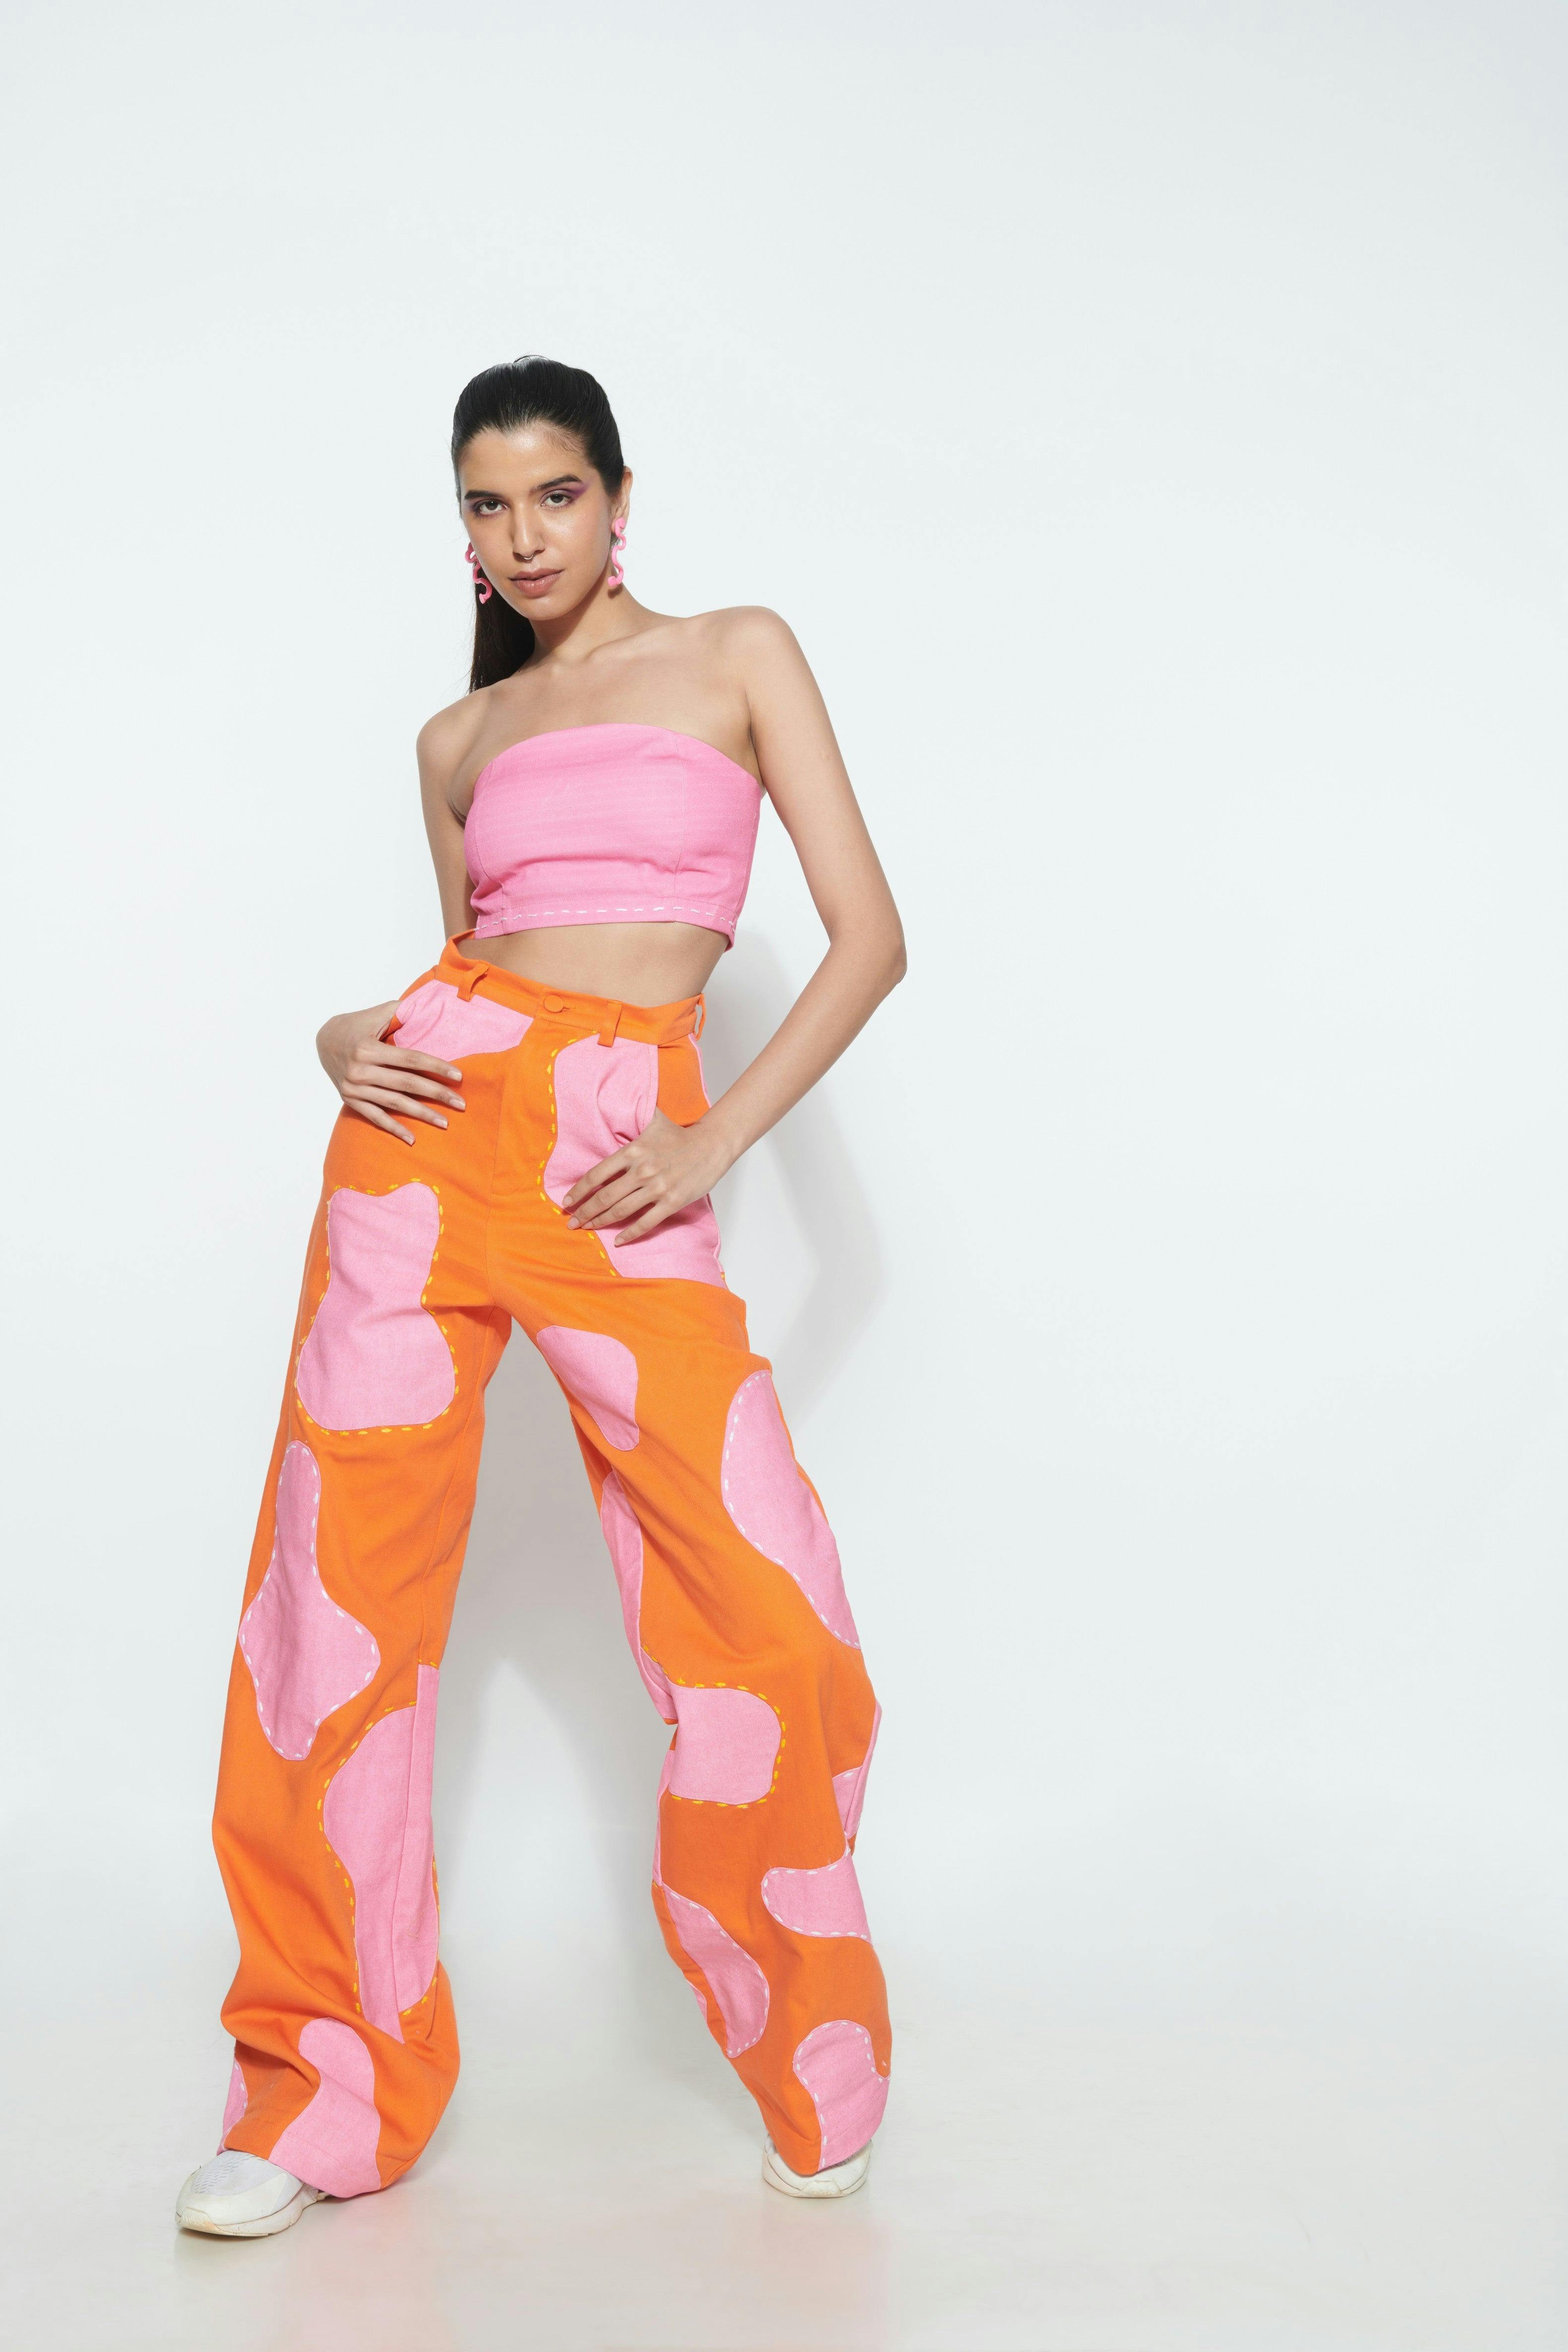 COTTON CANDY CROP TOP AND SPOTTED IN PINK PANTS CO-ORD SET, a product by Sazo